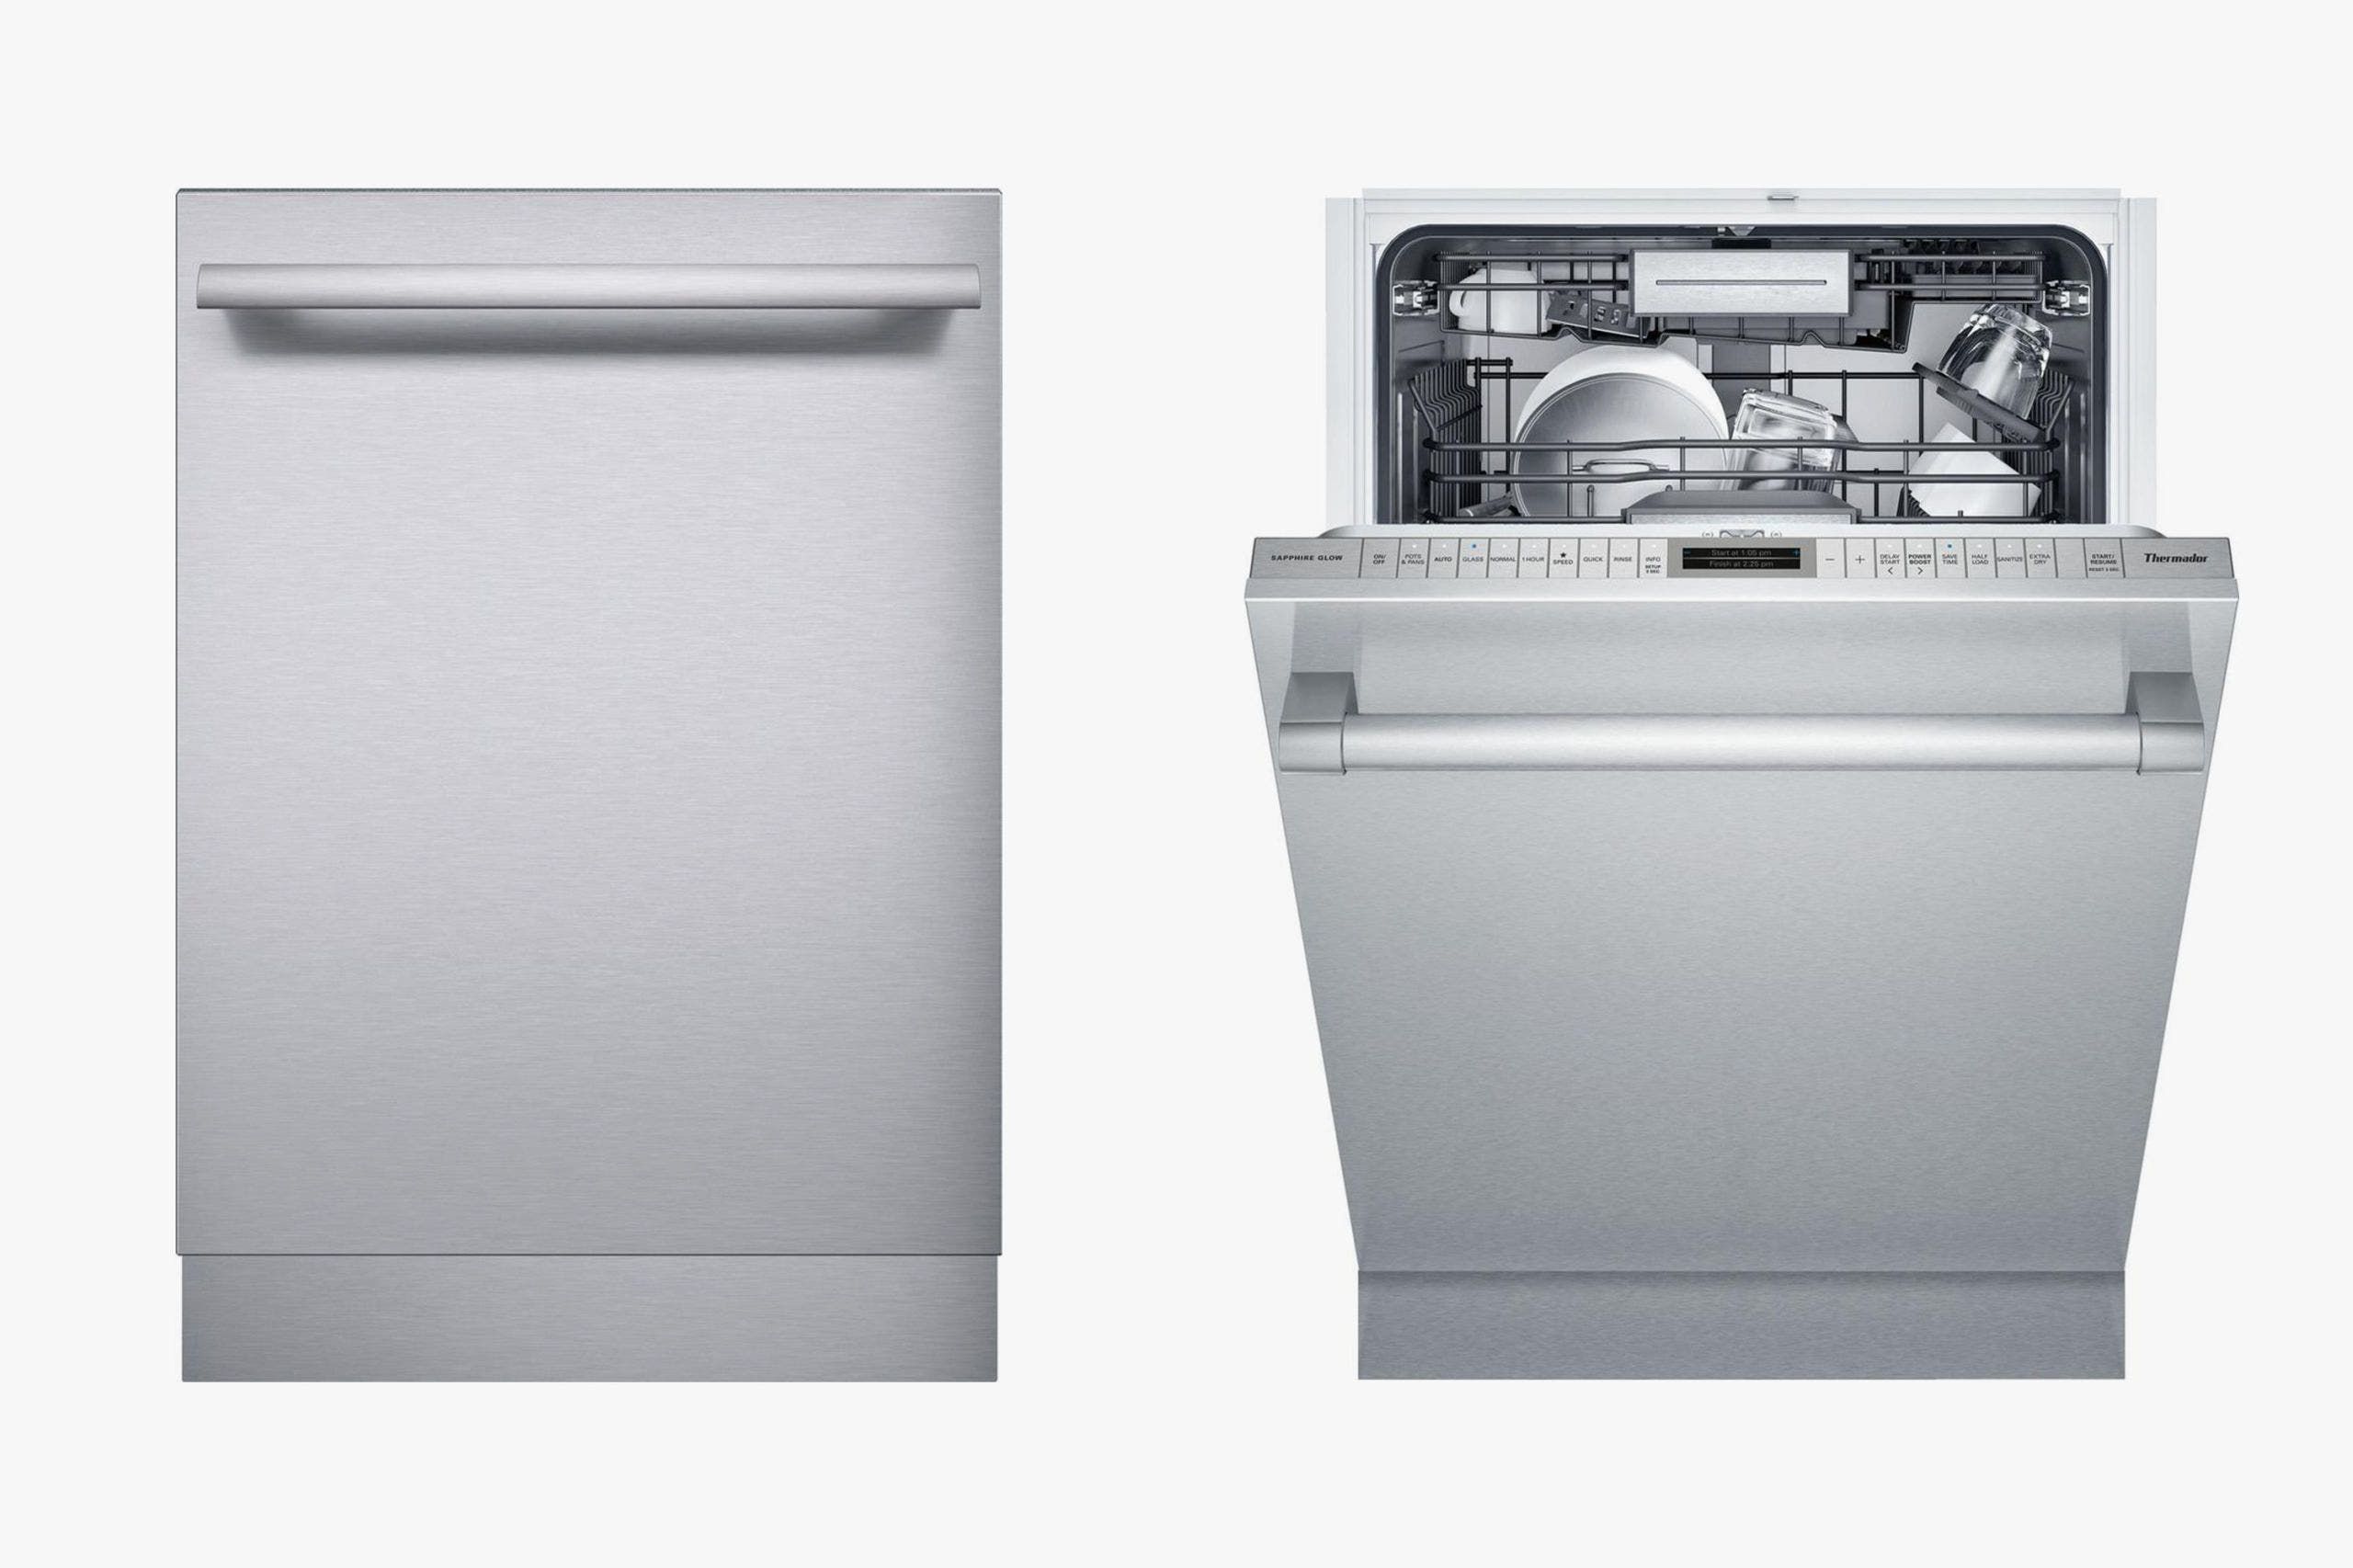 Thermador Star-Sapphire Series Dishwasher